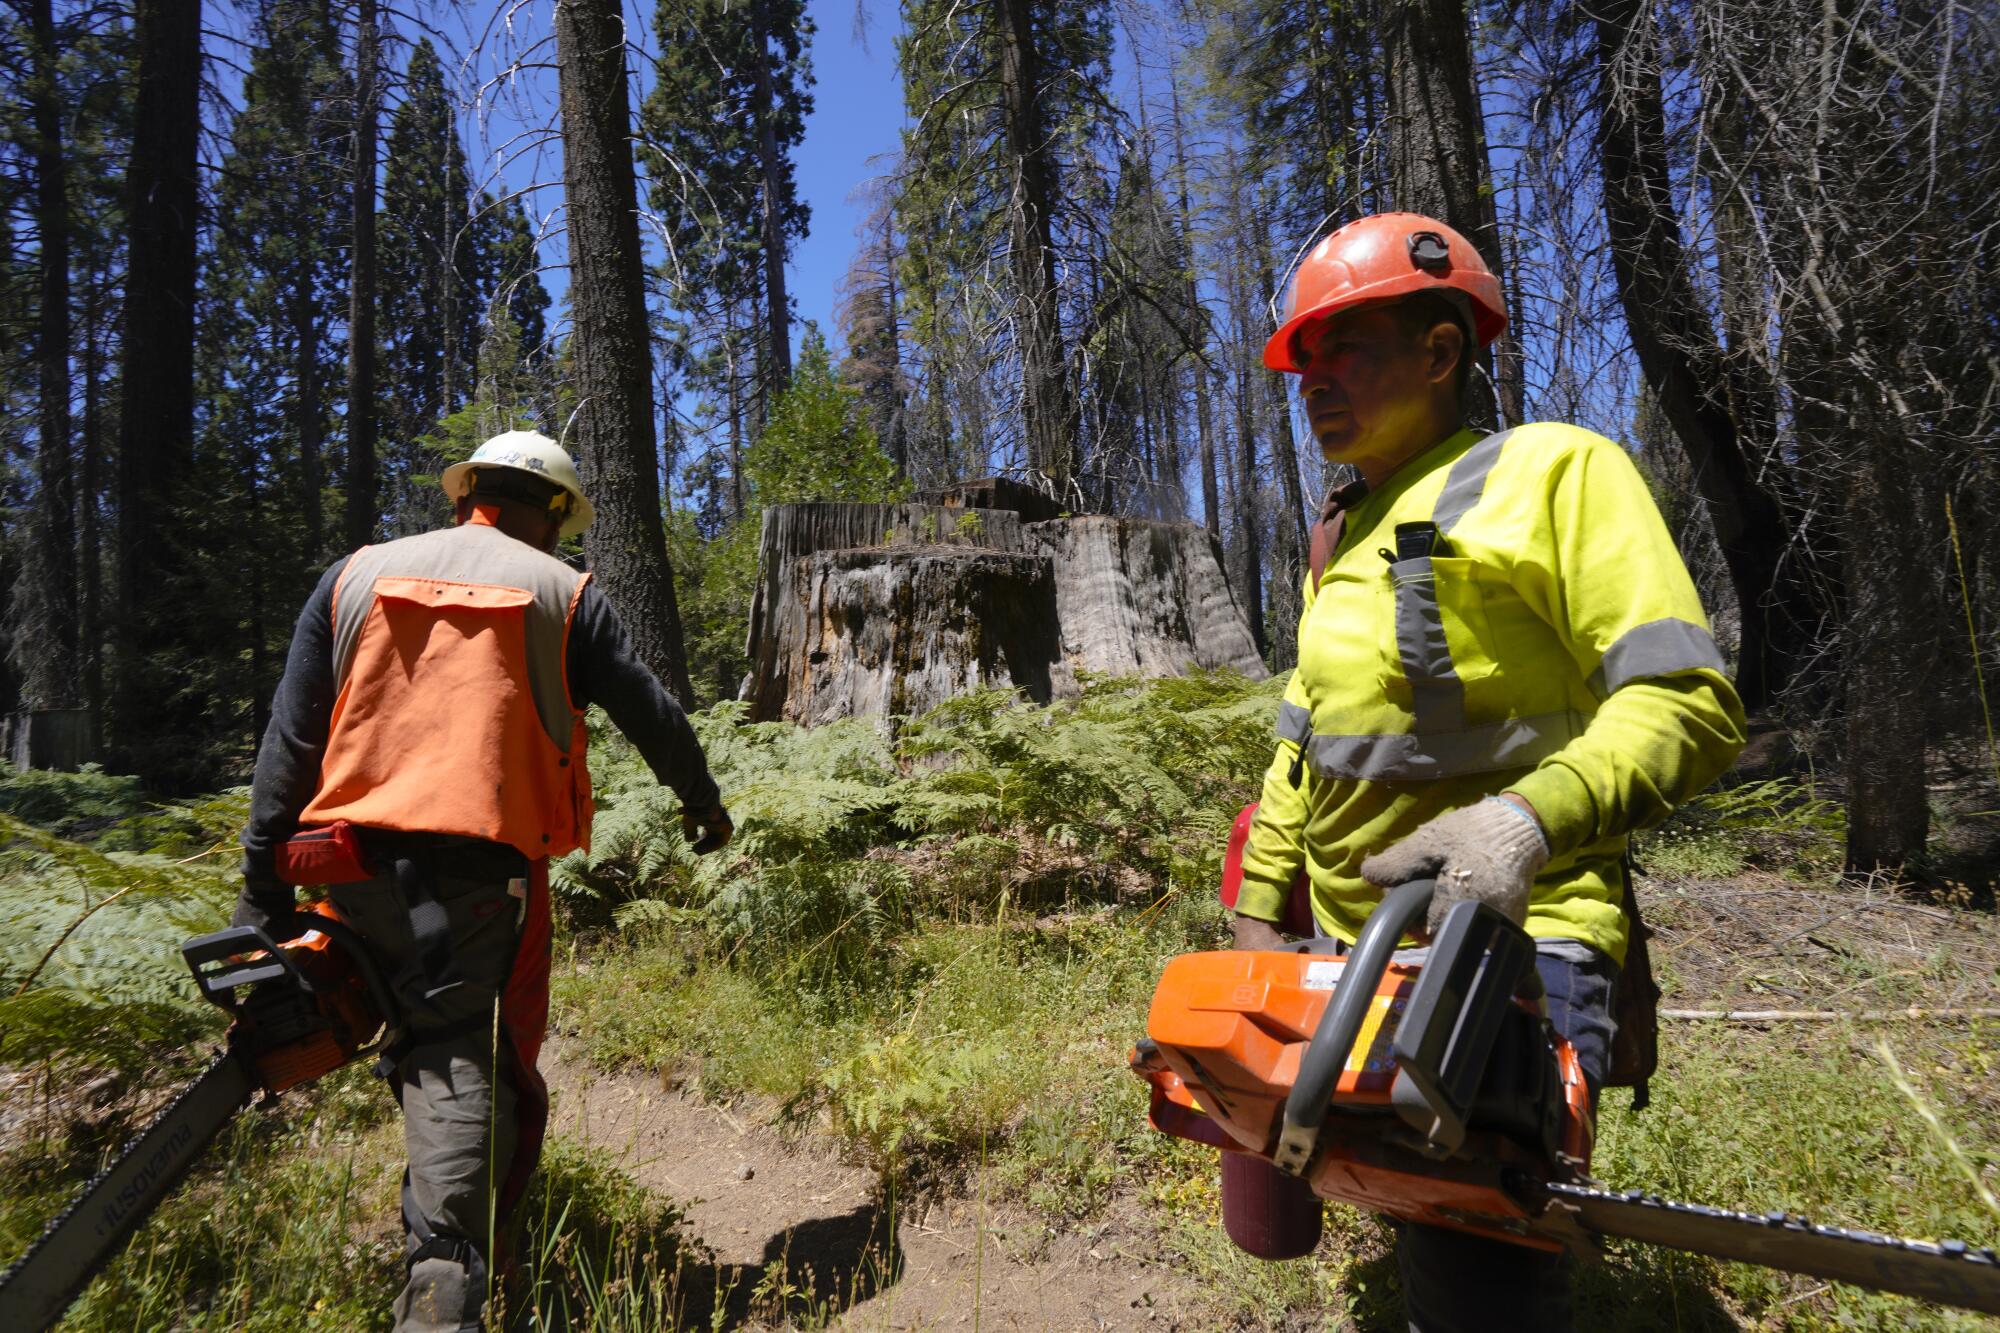 Work crews use chainsaws to cut trees at the Big Stump Picnic Area in Kings Canyon National Park.